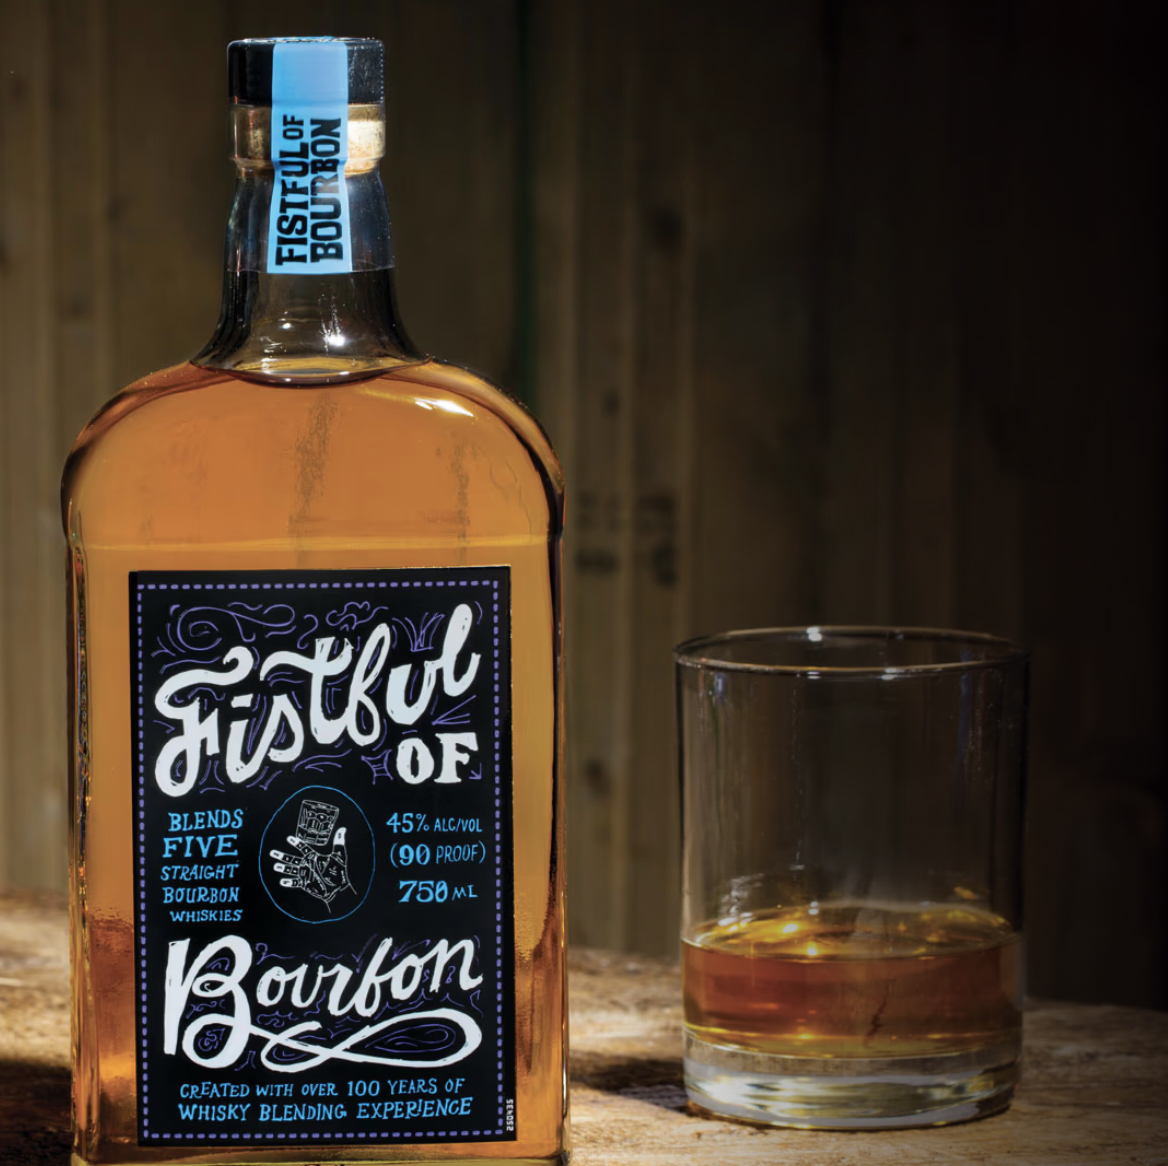 Check out our wonderful sponsor Fistful of Bourbon's website